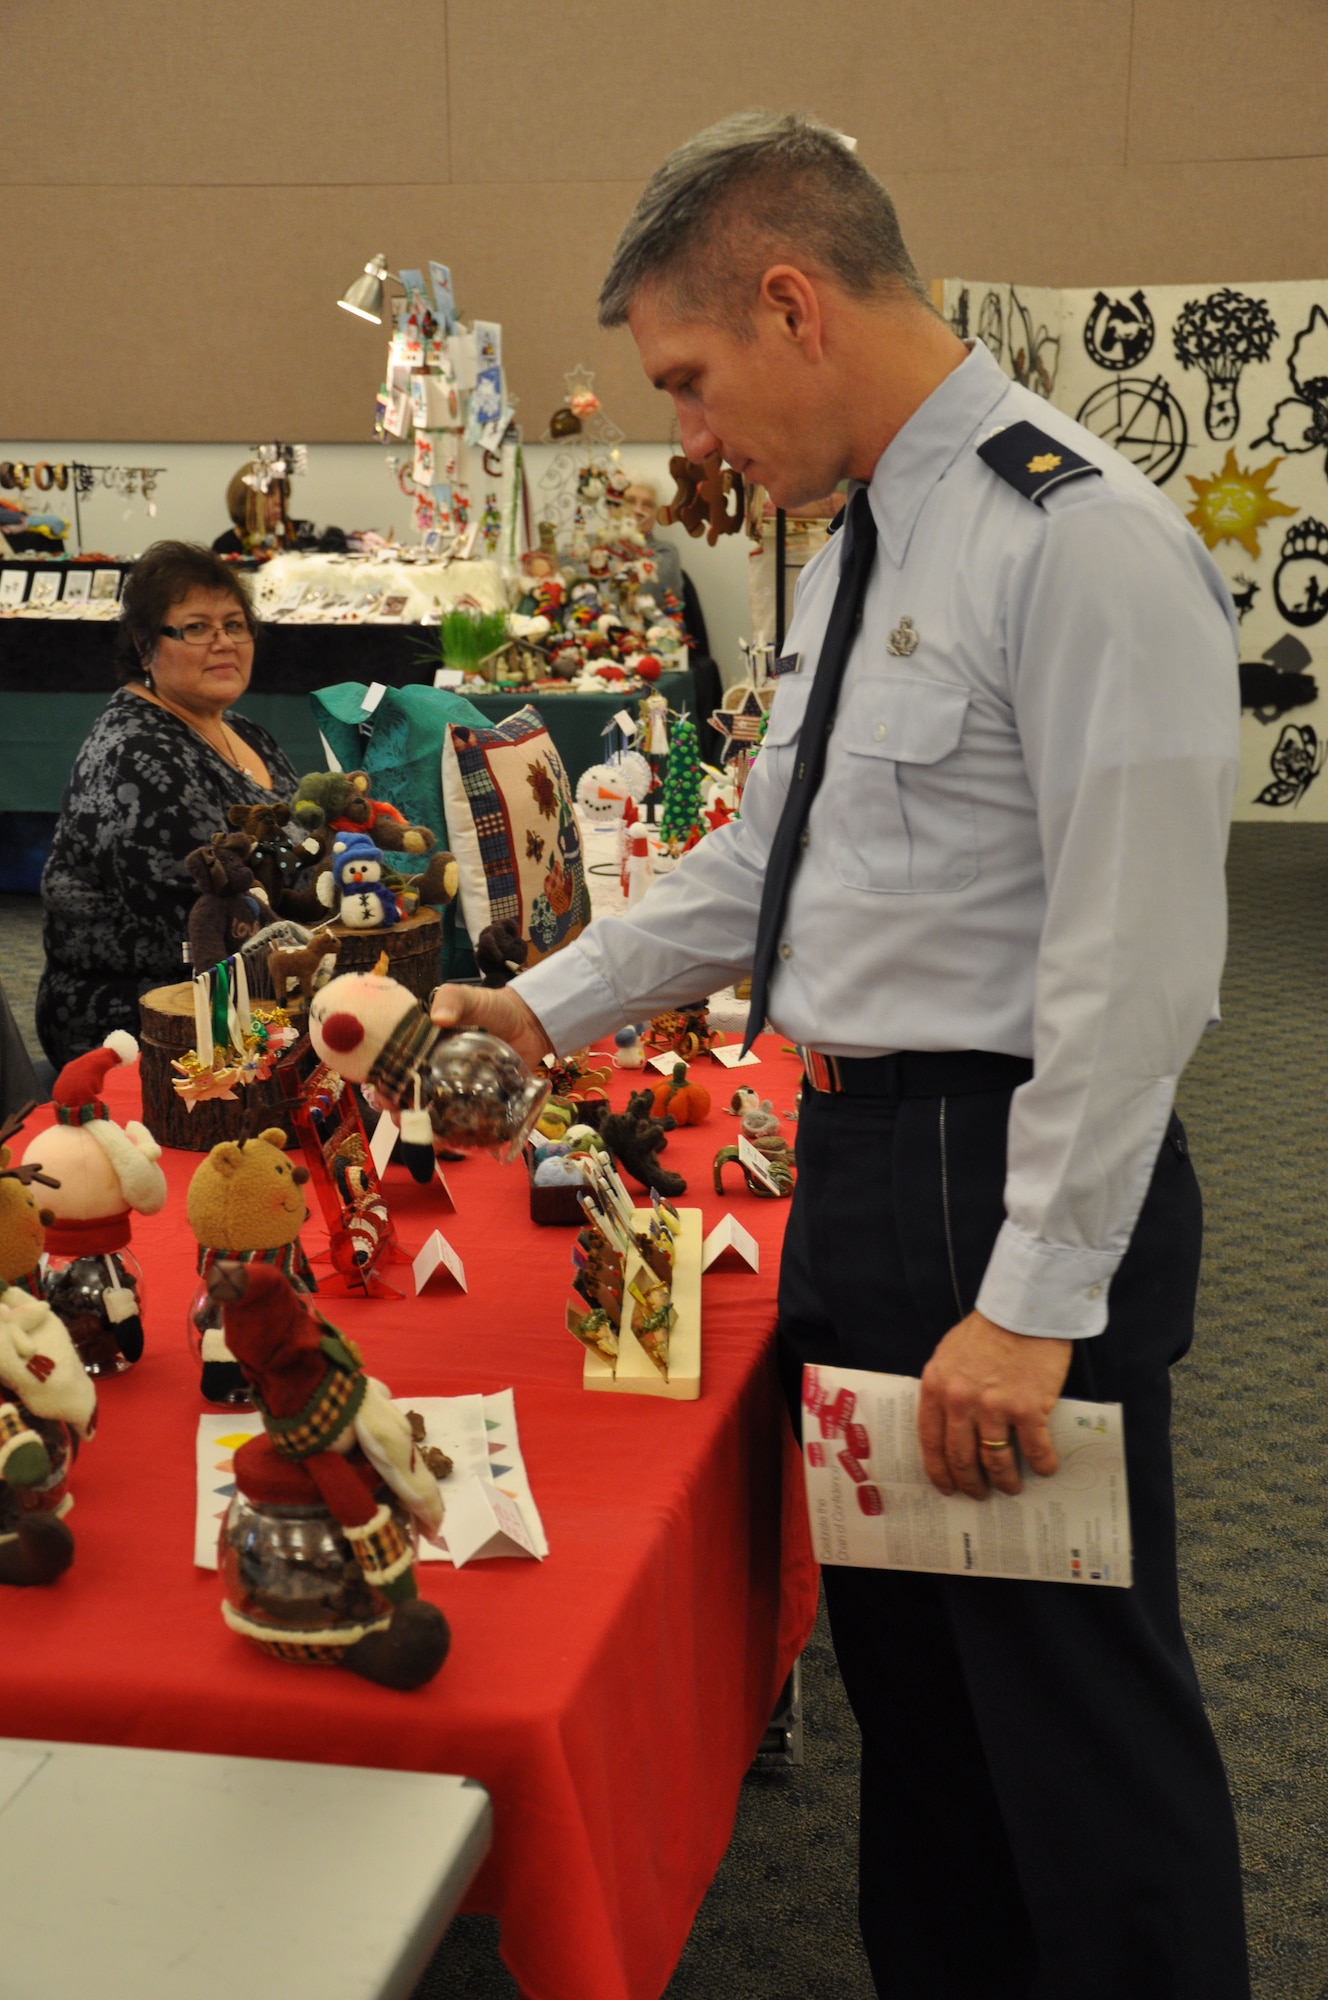 Maj. Chris Pewterbaugh, 7th Space Warning Squadron engineering specialist, browses through some holiday gifts while attending the Holiday Bazaar at the Beale Air force Base Calif., Community Activity Center Nov. 28, 2011. The Bazaar hosted more than 30 different holiday vendors. (U.S. Air Force photo by Staff Sgt. Robert M. Trujillo/Released)